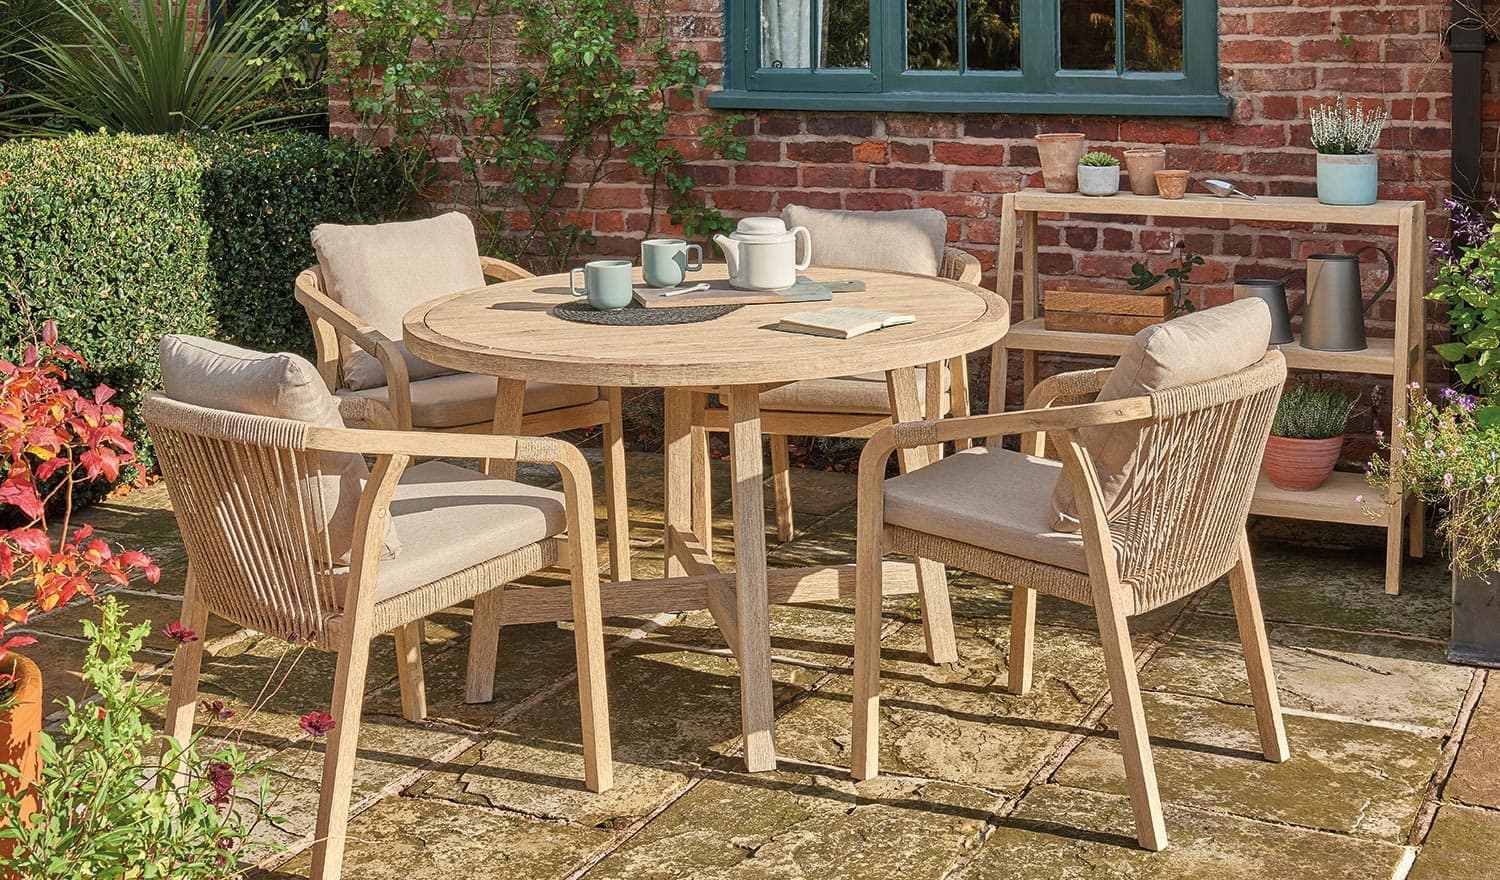 Cora 120cm Round Dining Table 4 Seater, Round Wood Outdoor Table Set